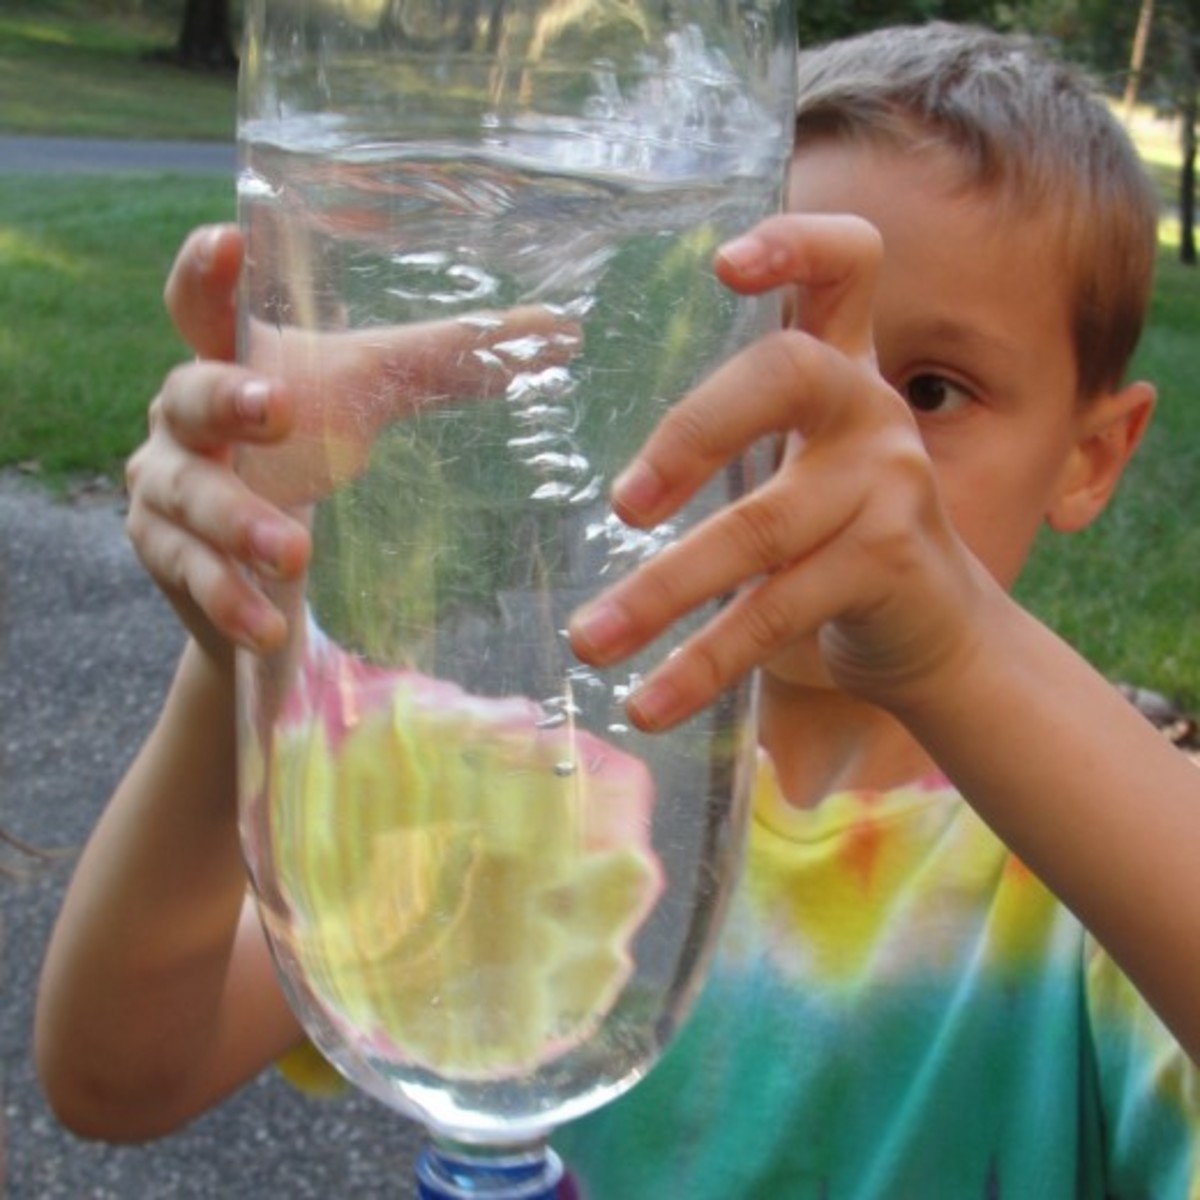 Making a tornado in a bottle was one of the activities we did this week at home during our Science Morning Basket & Activities time from the above link on Weather Fronts.